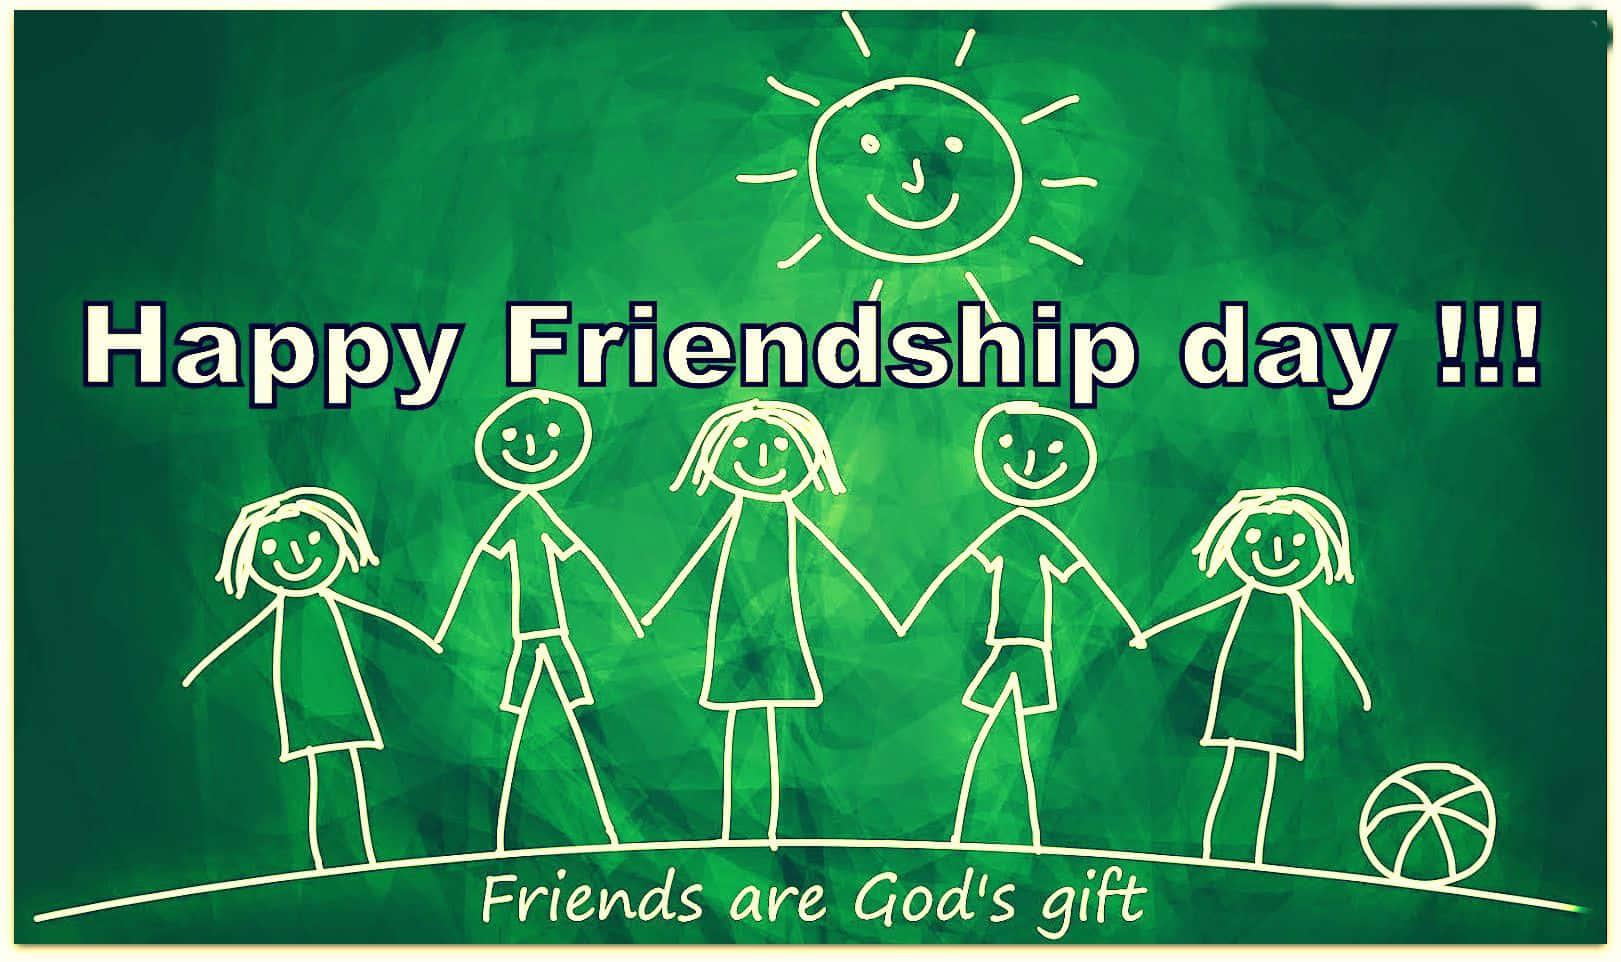 Celebrate Friendship Day with family and friends